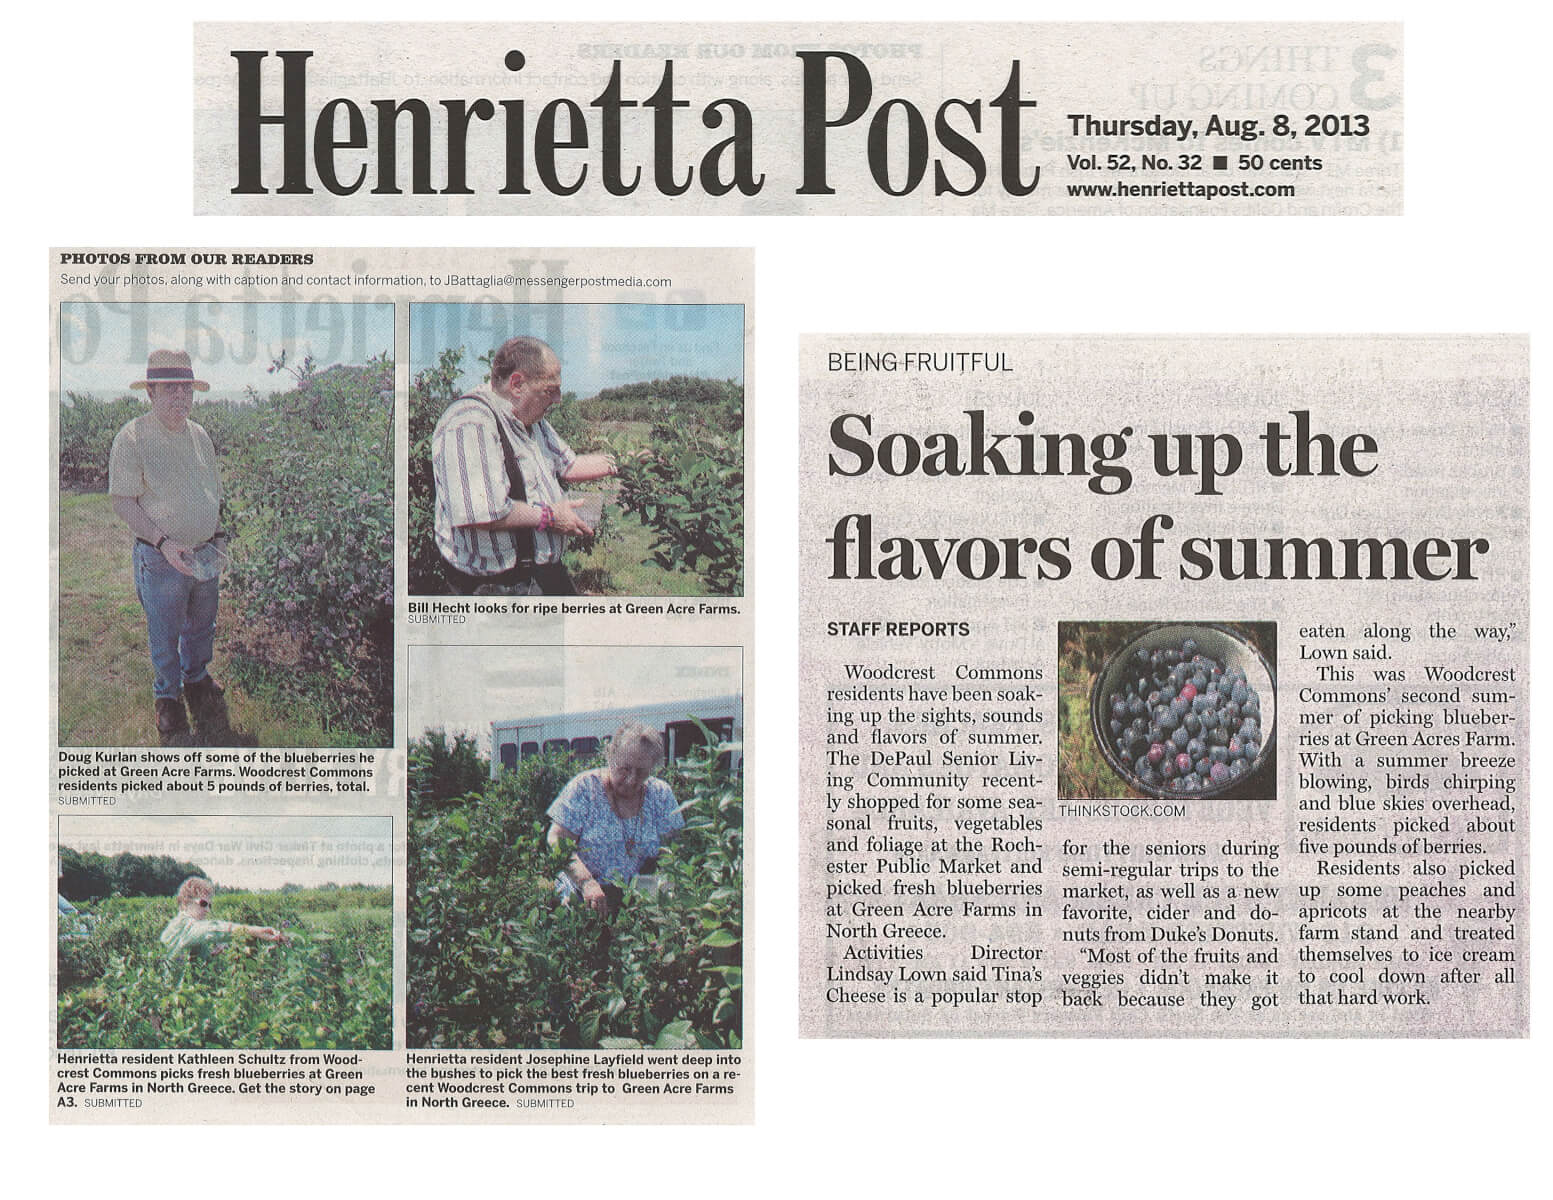 Woodcrest Commons Soaking up the Flavors of Summer article in the Henrietta Post August 2013